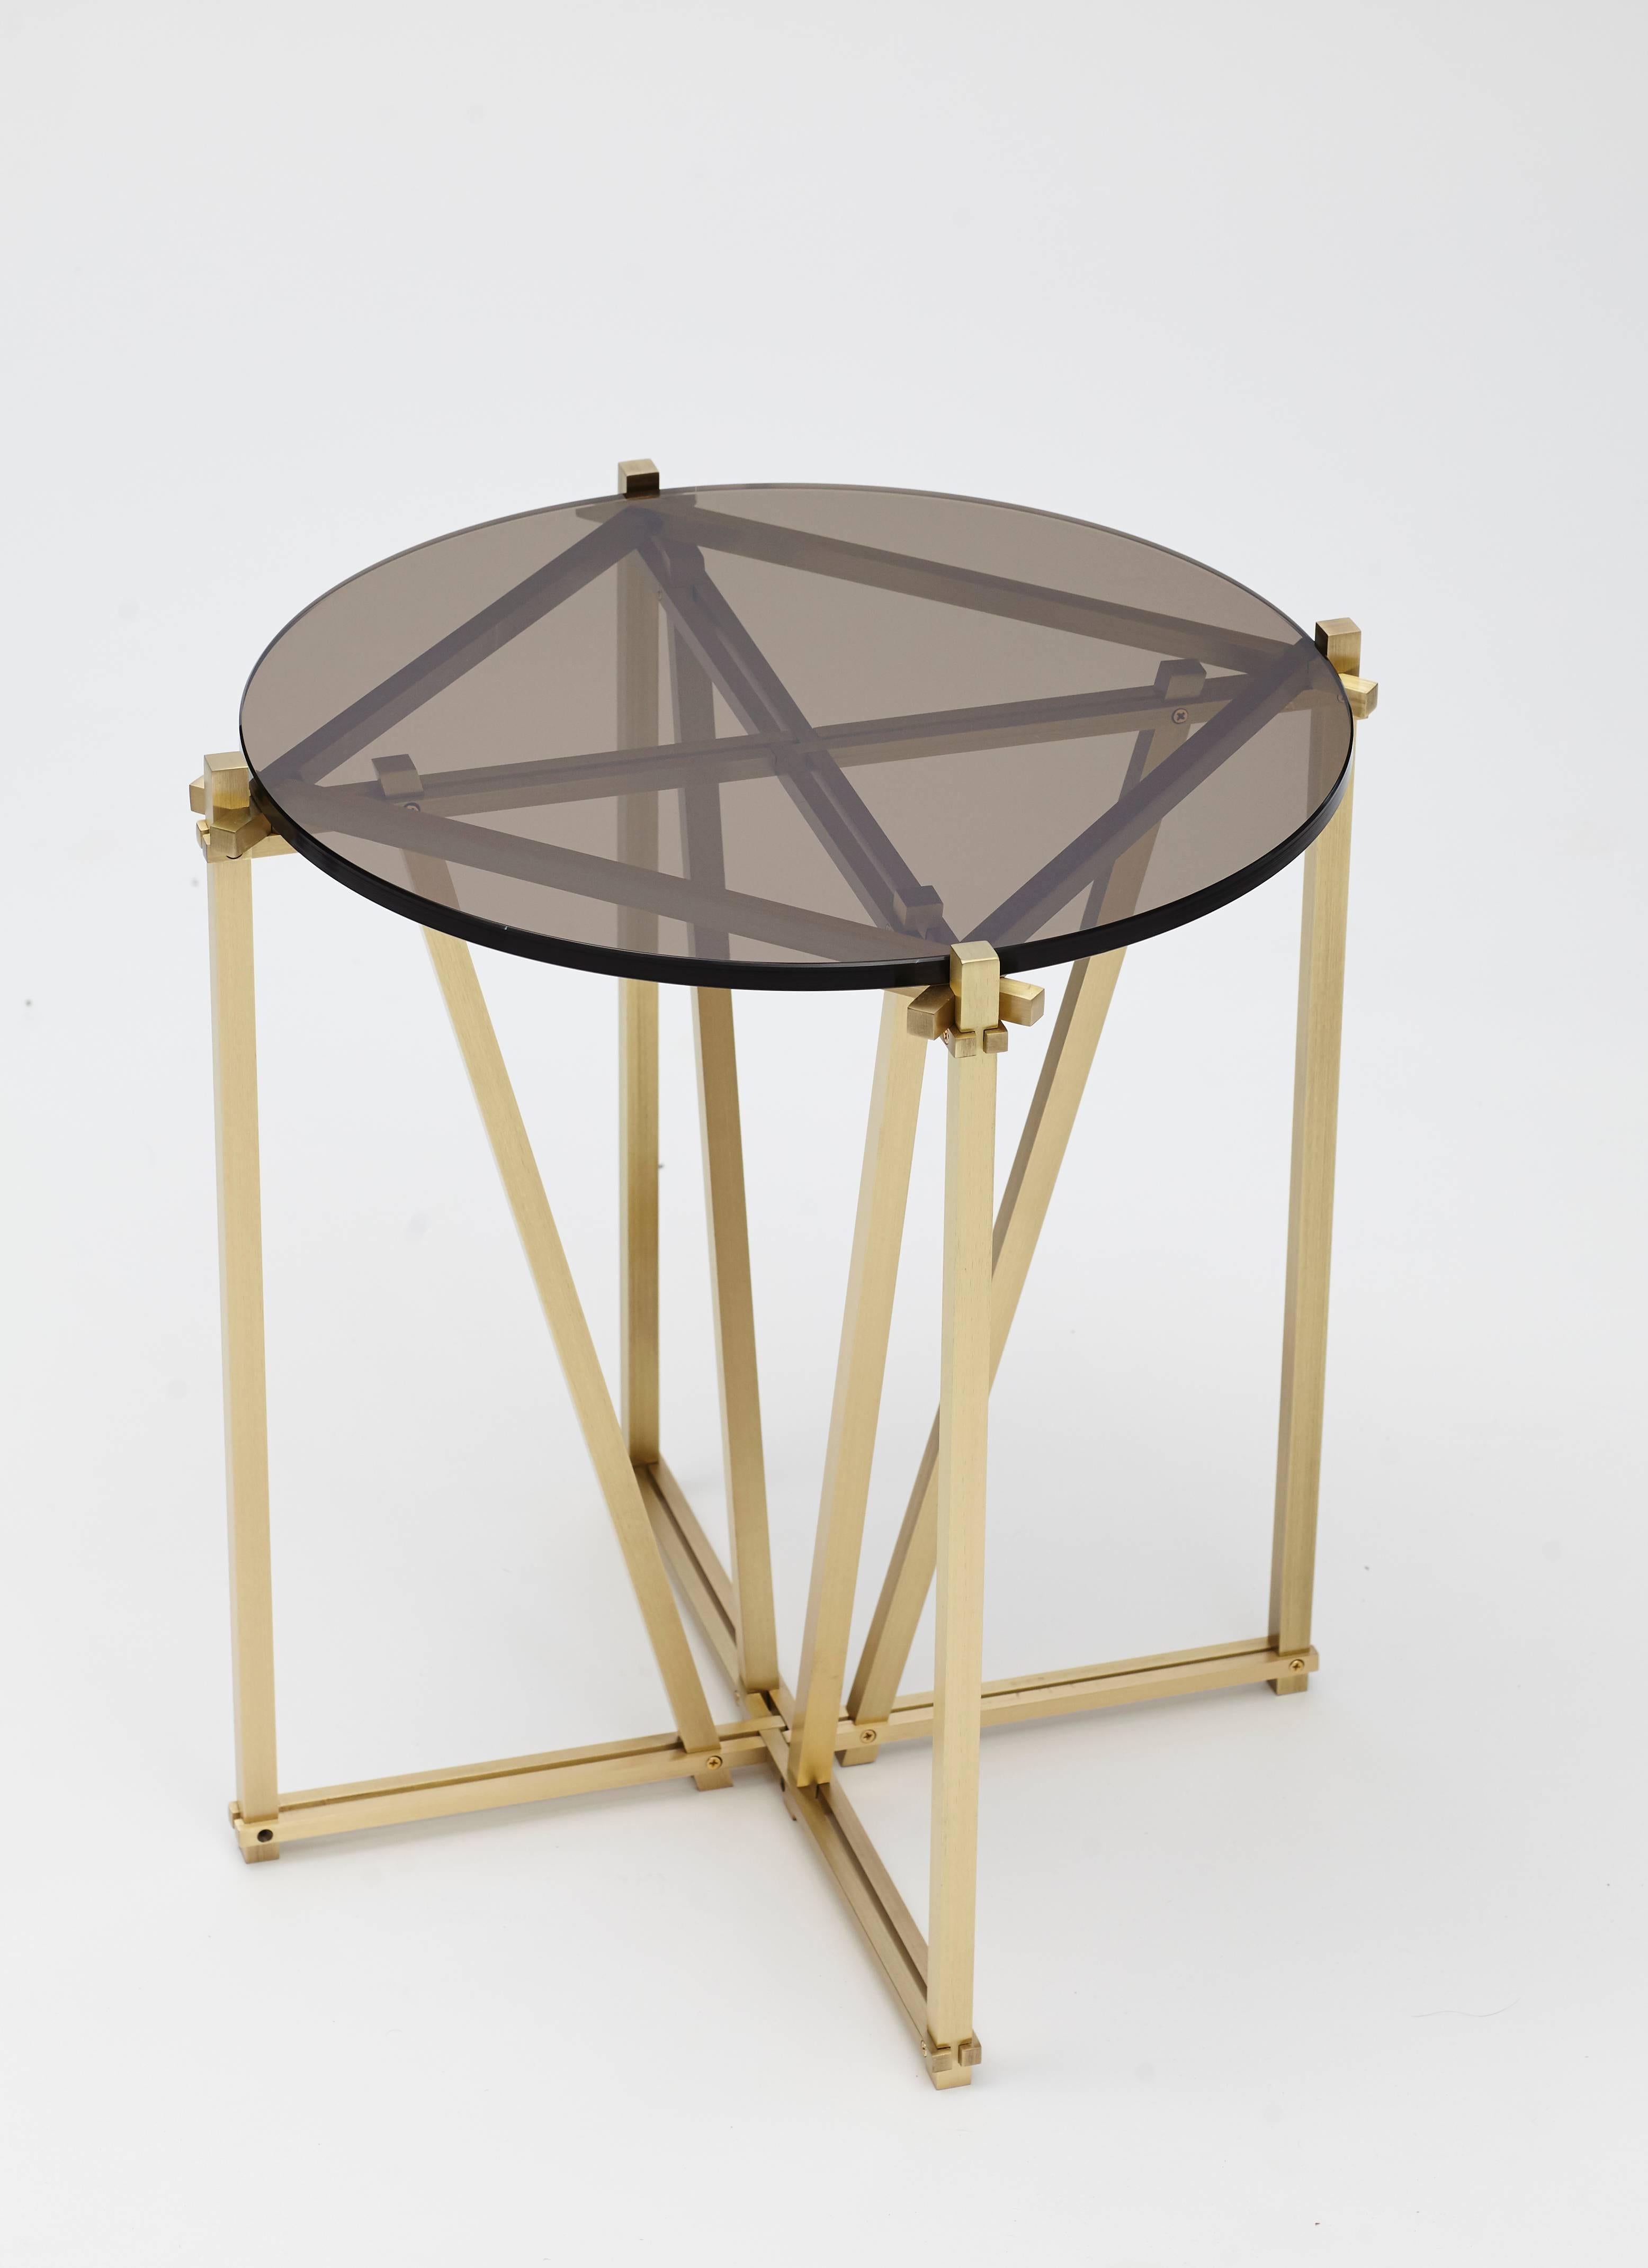 Based on the structural concept of the same name, the Tensegrity series evokes a complex yet elegant style by intertwining contemporary lines with contrasting metallic elements.

Intricate yet simple, the clear and smoked glass tops offer an elegant